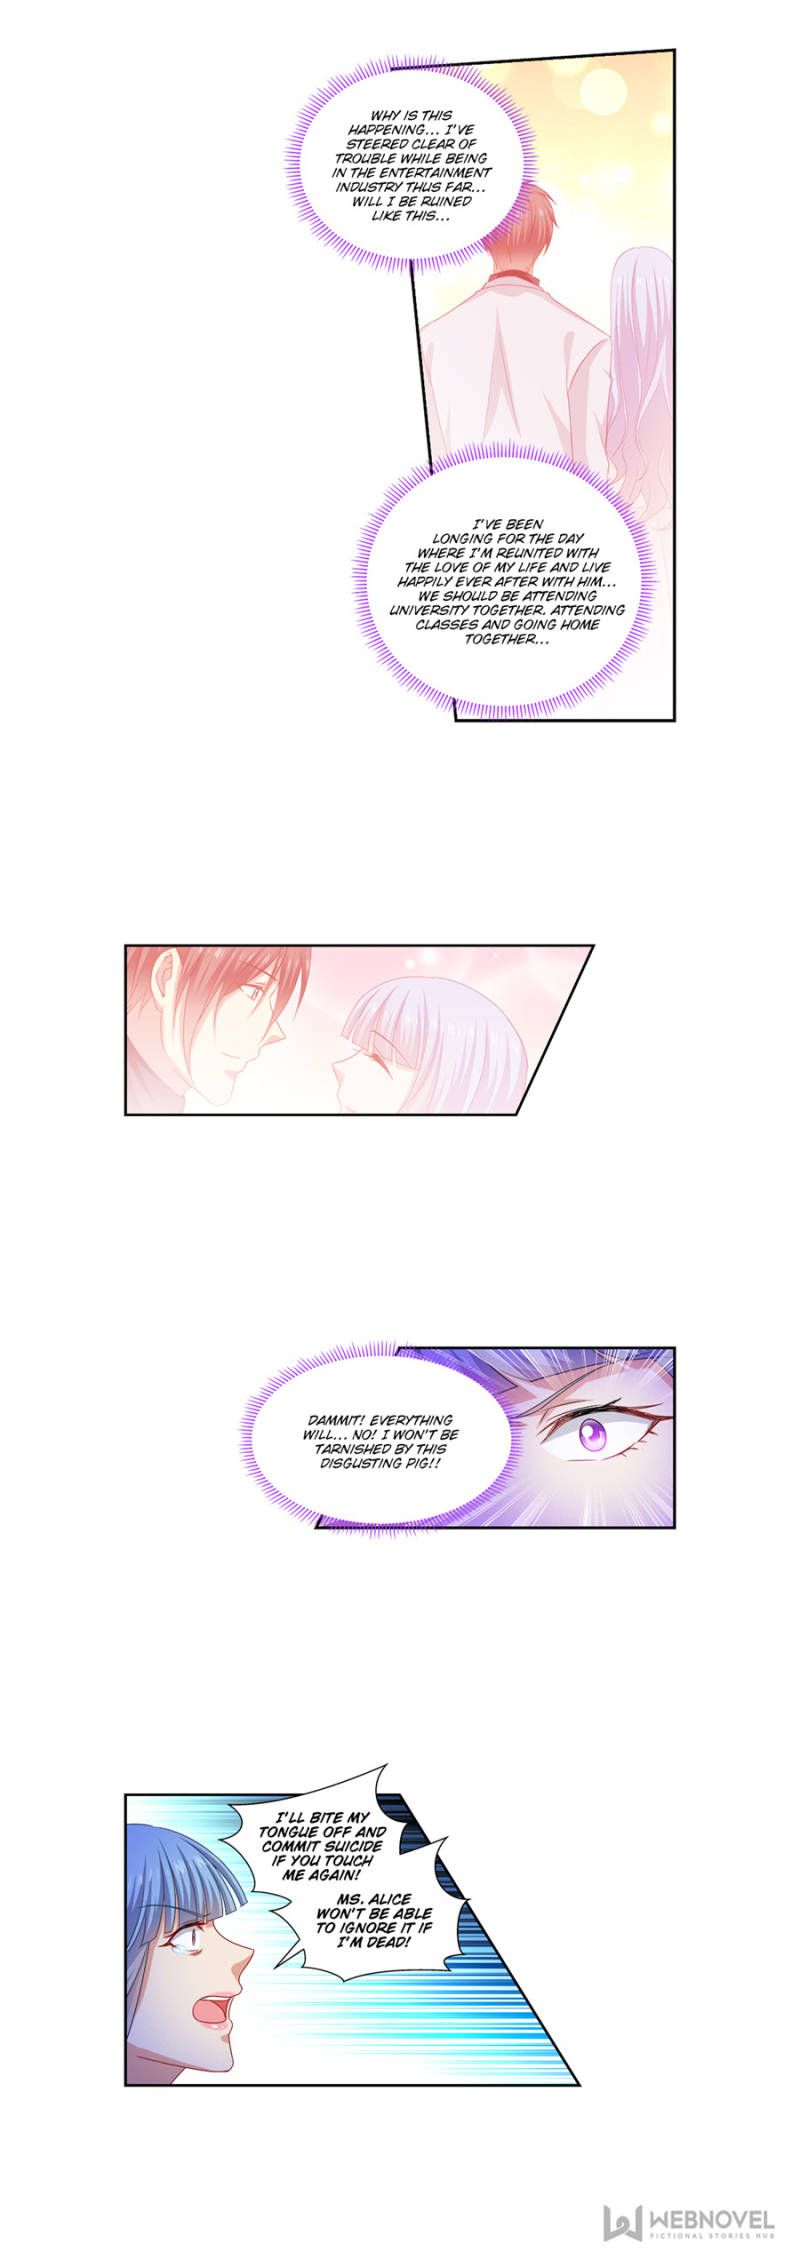 So Pure, So Flirtatious ( Very Pure ) Chapter 284 page 9